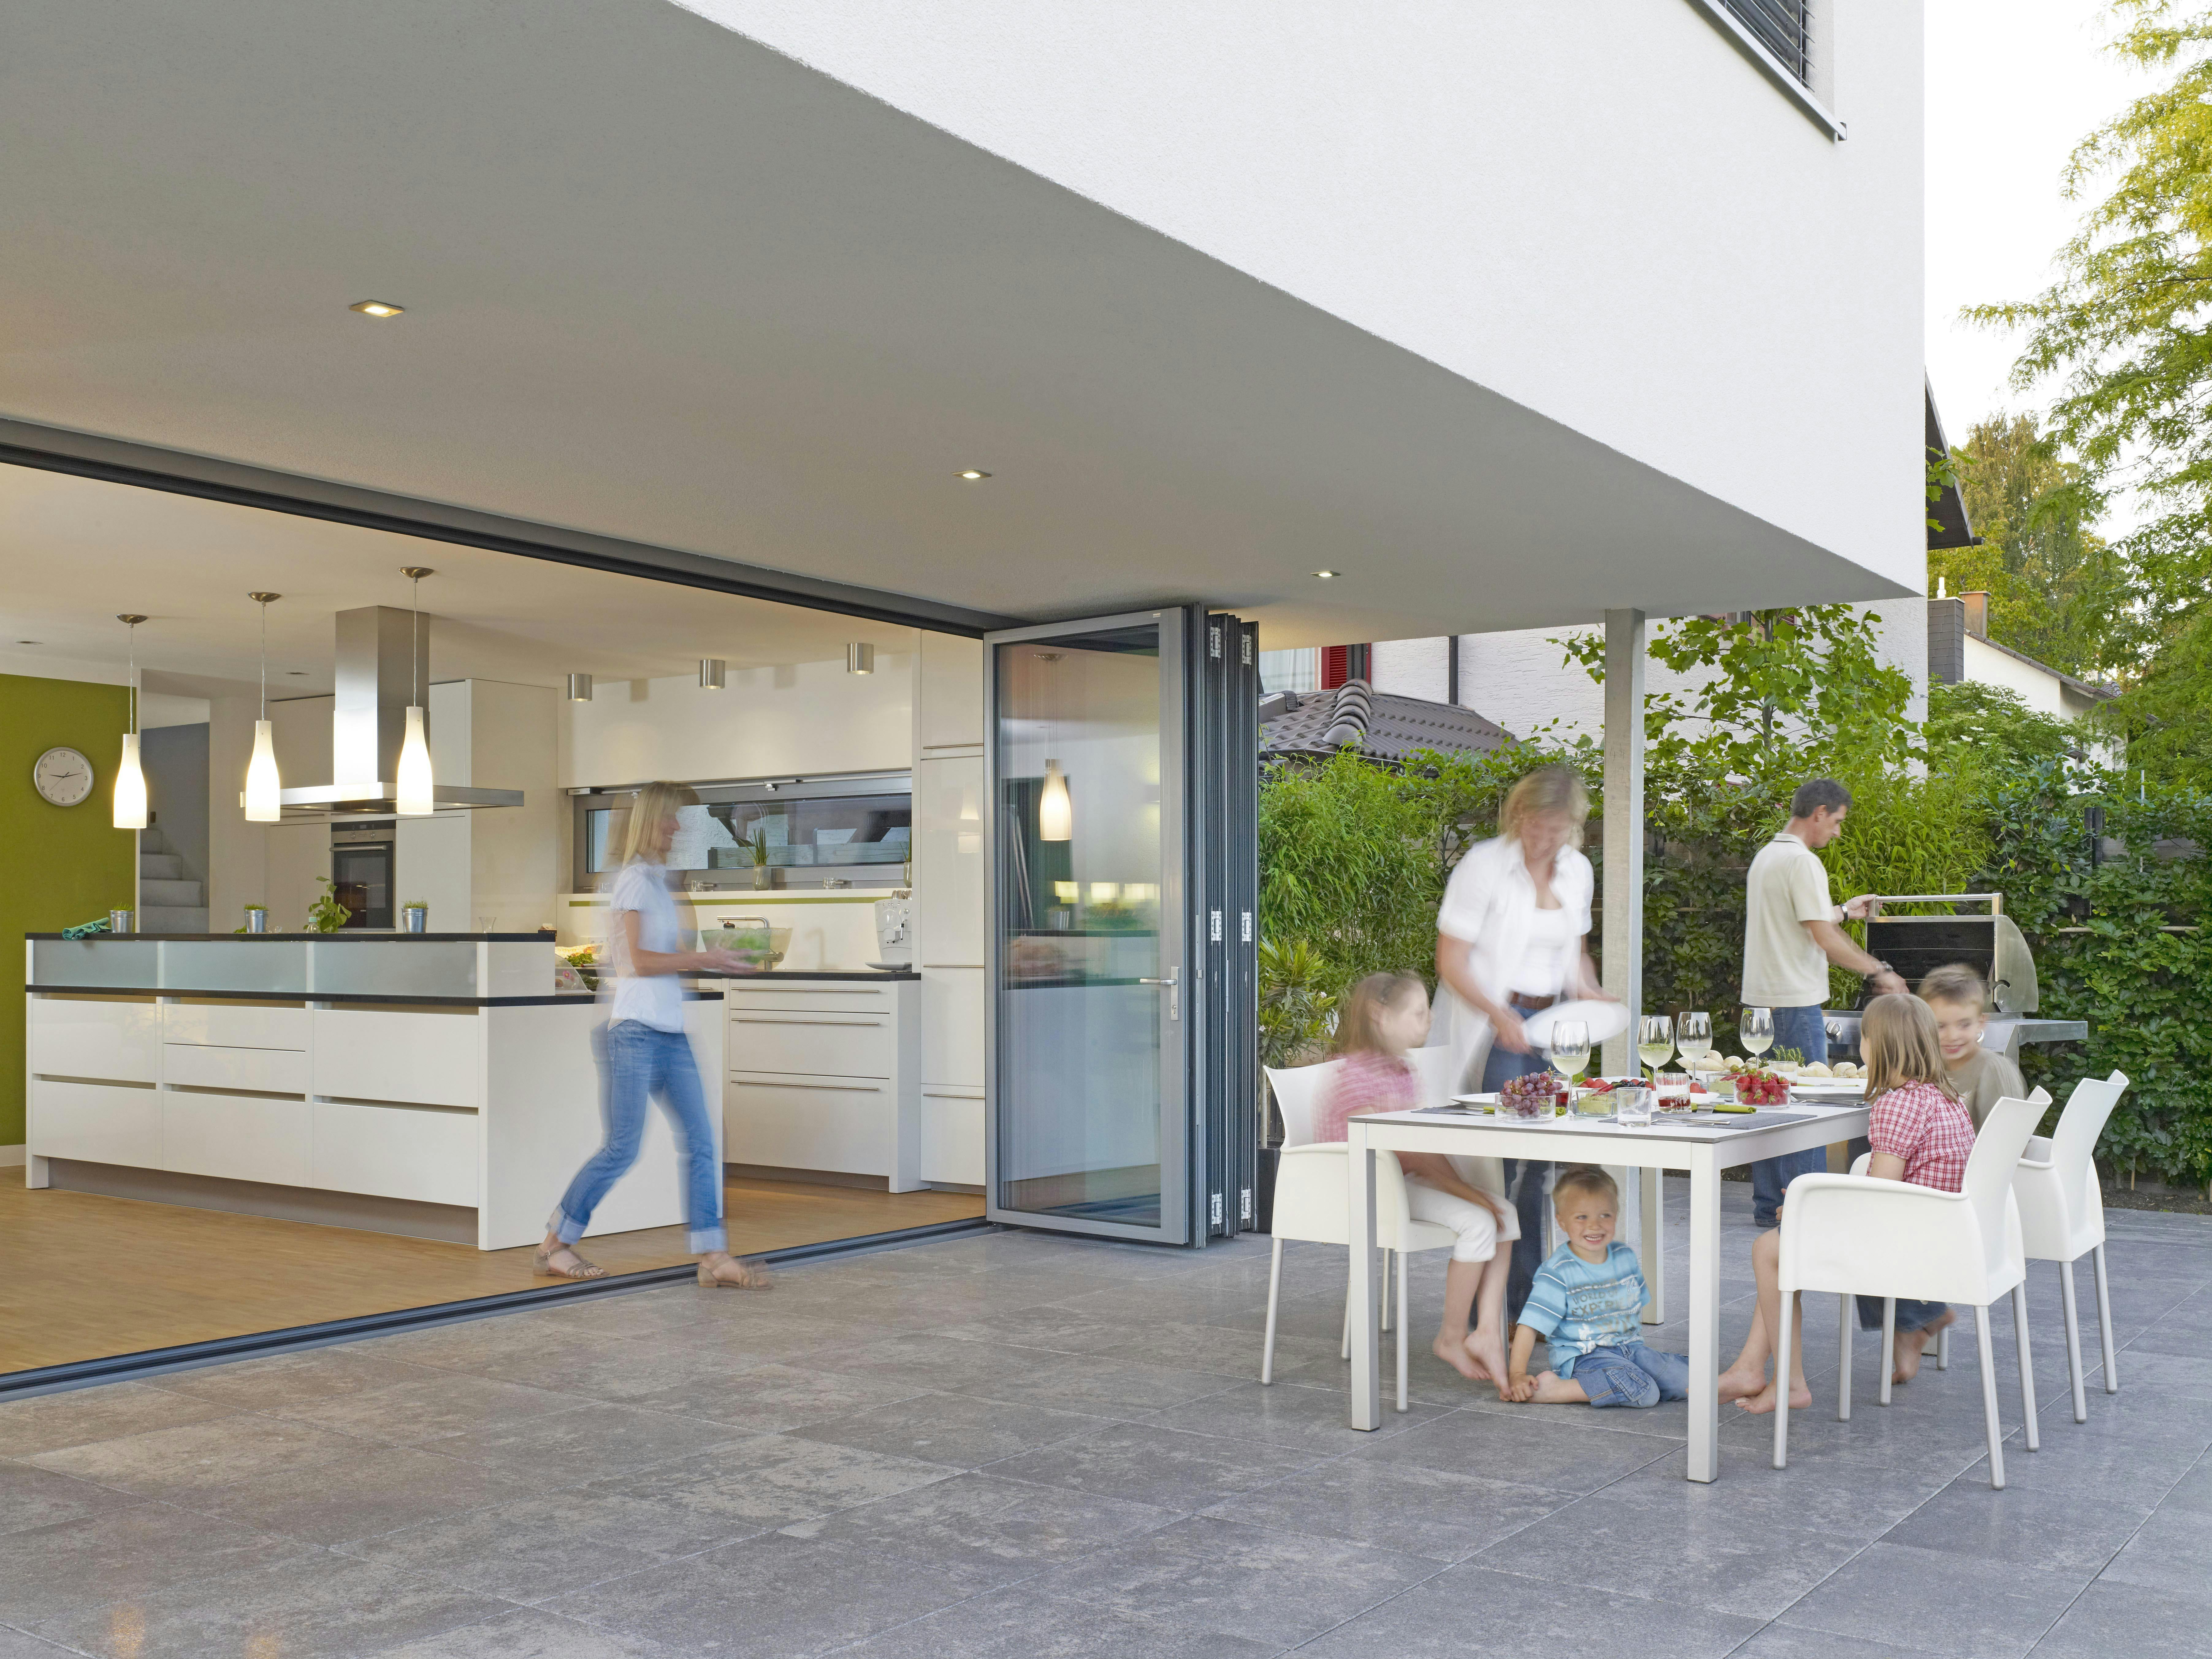 Bi-folding-glass-walls-are-a-great-alternative-to-the-traditional-sliding-glass-patio-door